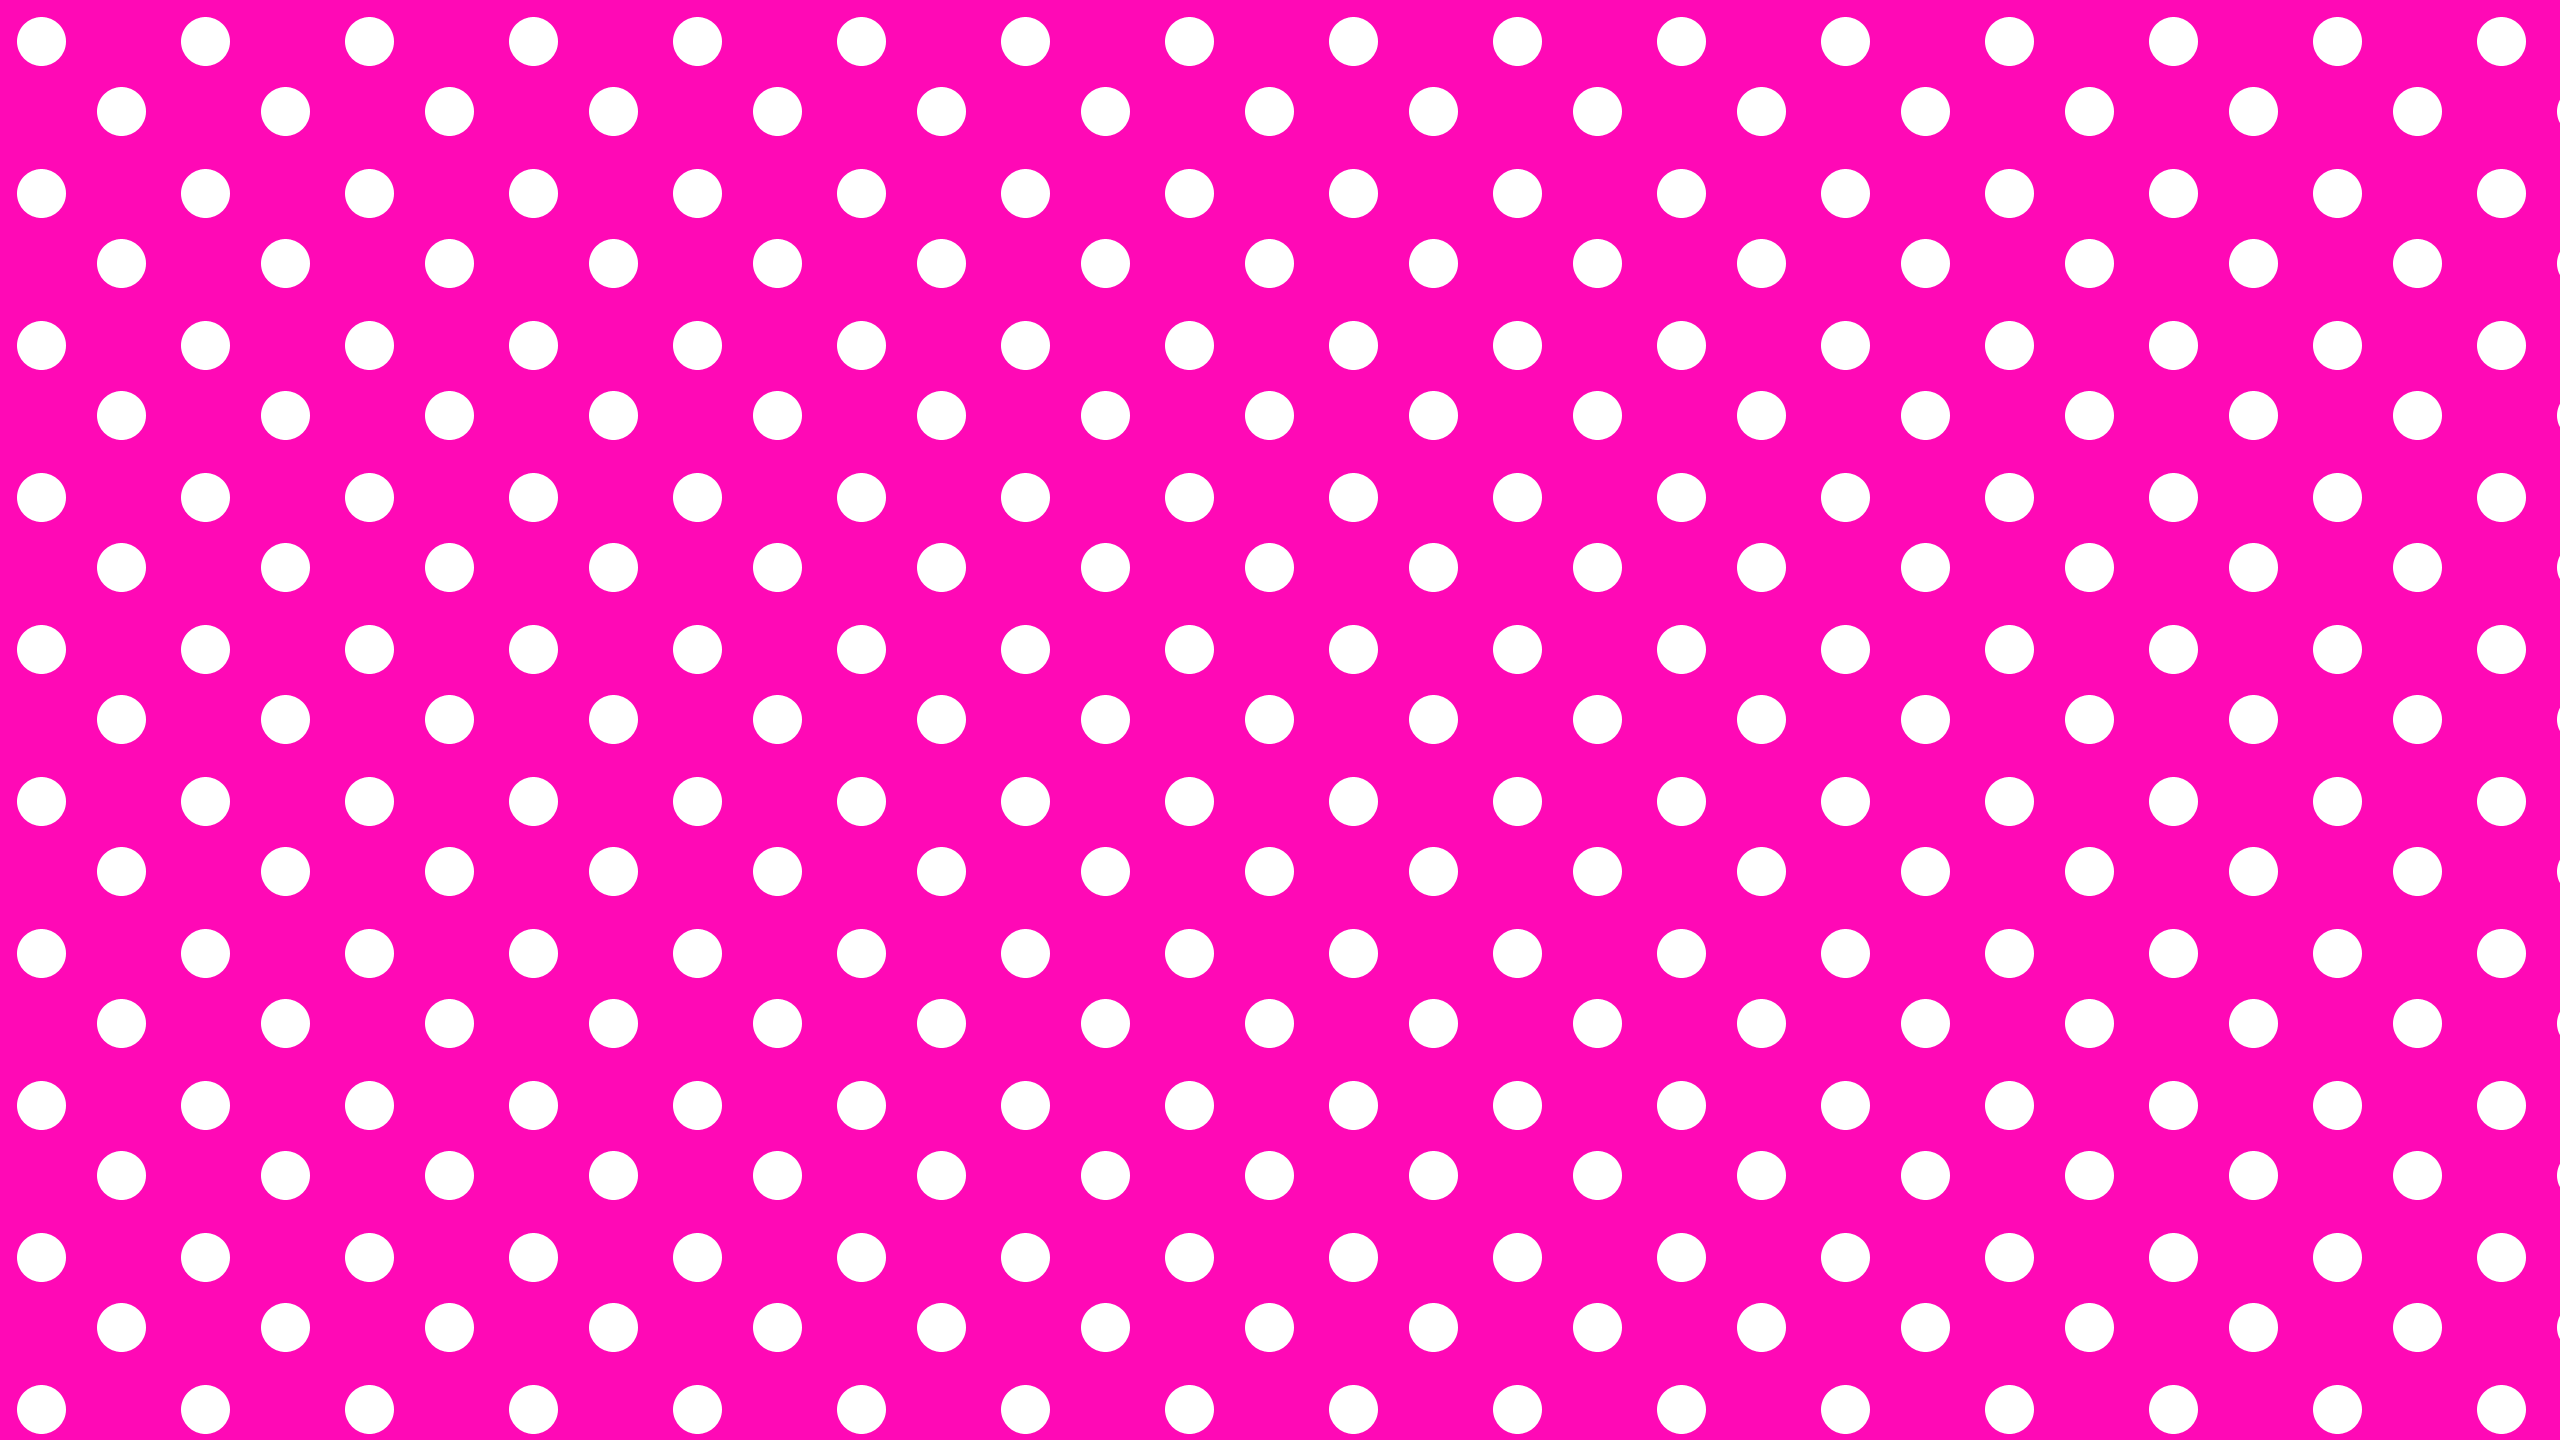 this Large Pink Desktop Wallpaper is easy Just save the wallpaper